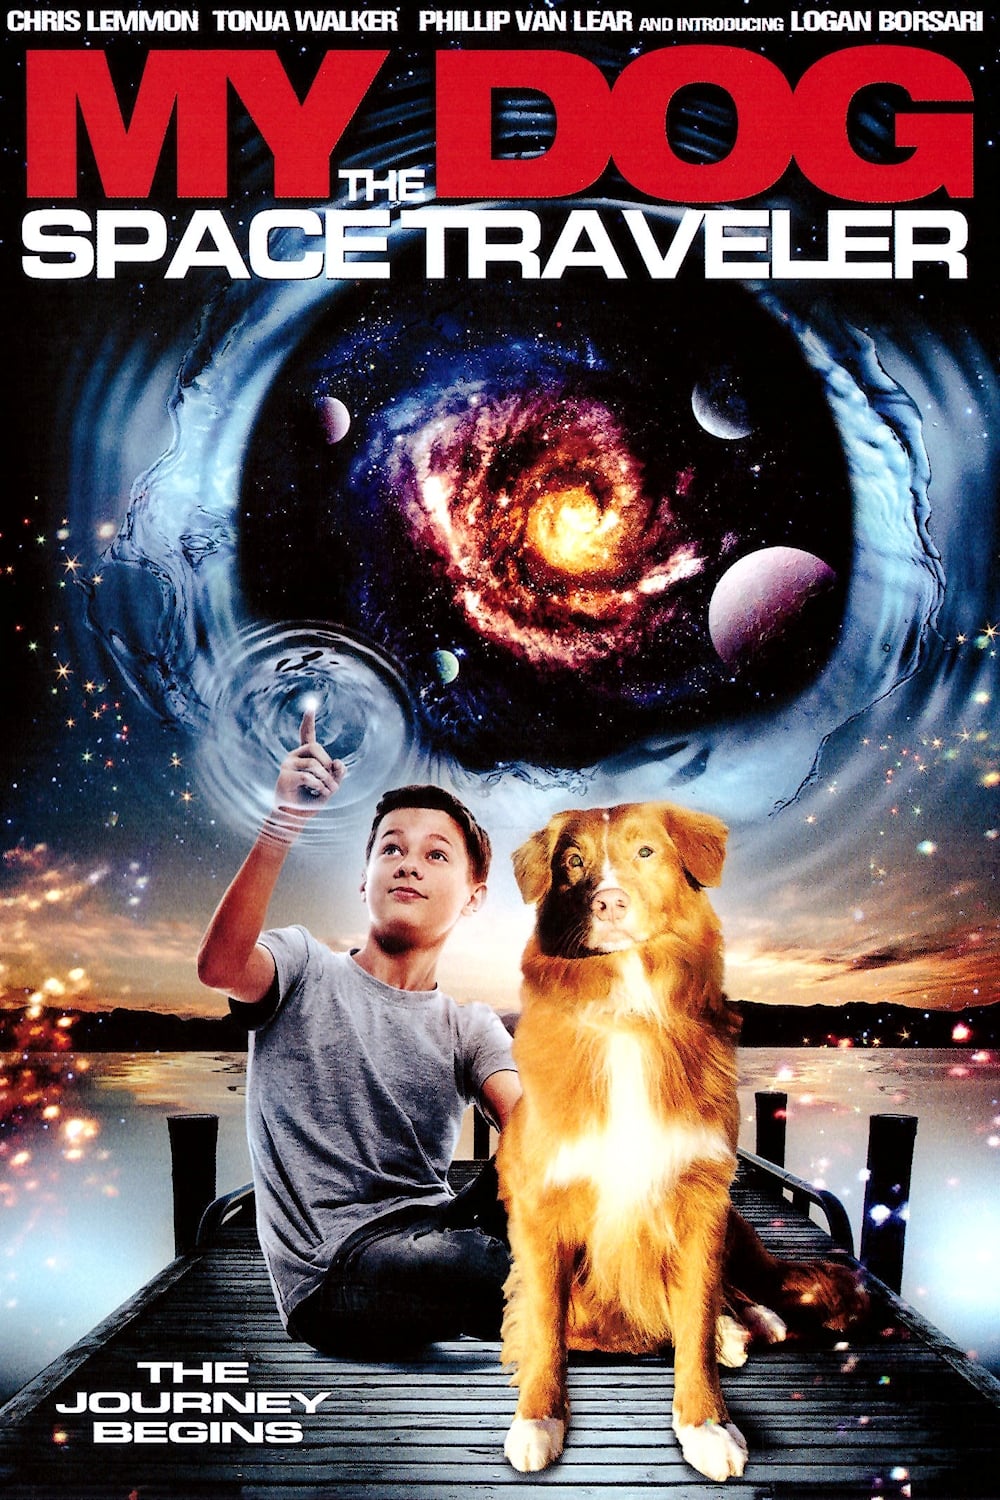 My Dog the Space Traveler (2013)